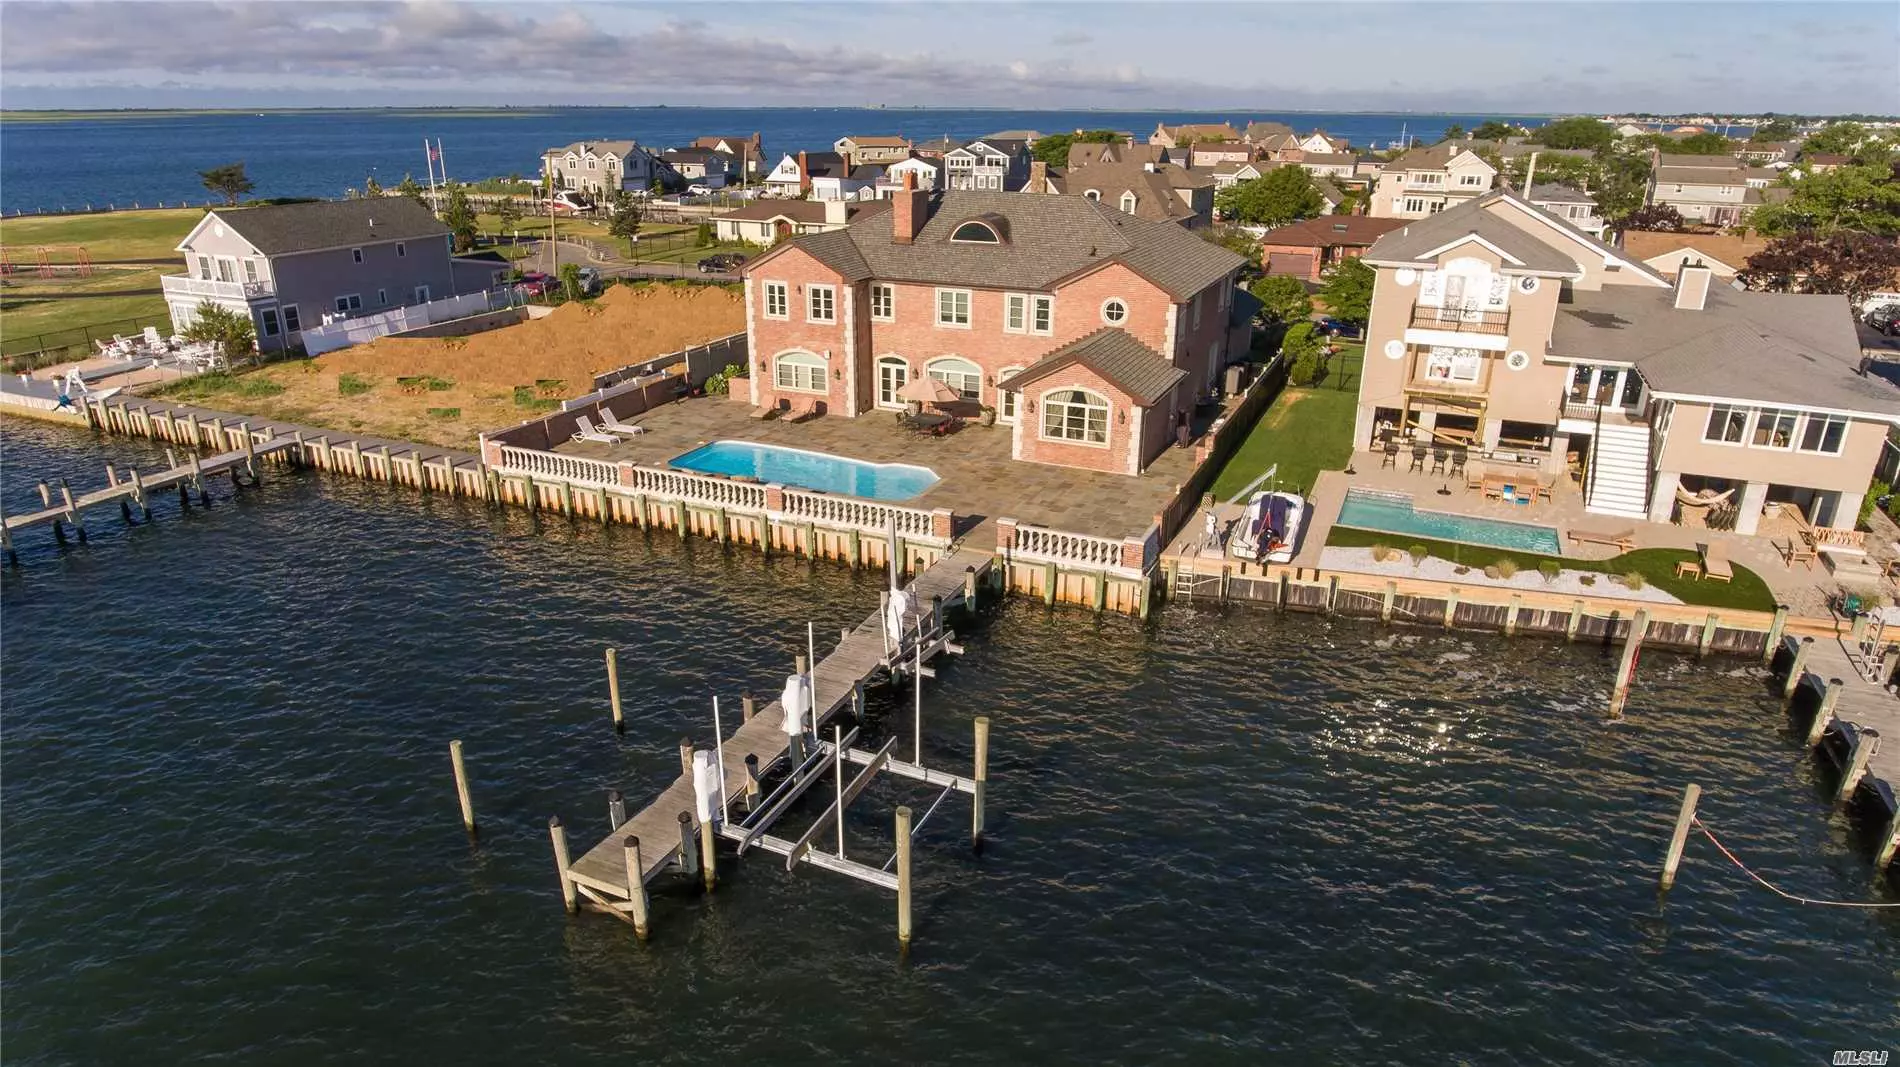 Majestic Brick Bayfront Home Built In 2008 With Every Amenity Known To Man. No Expense Spared & Only The Finest Materials Used. Savor The Beautiful Bayviews & Store Your Boat & Jet Ski Safely On The Lift On The 61 Foot Pier Then Take A Dip In The Saltwater Pool.  Livin&rsquo; L A R G E ! ! !